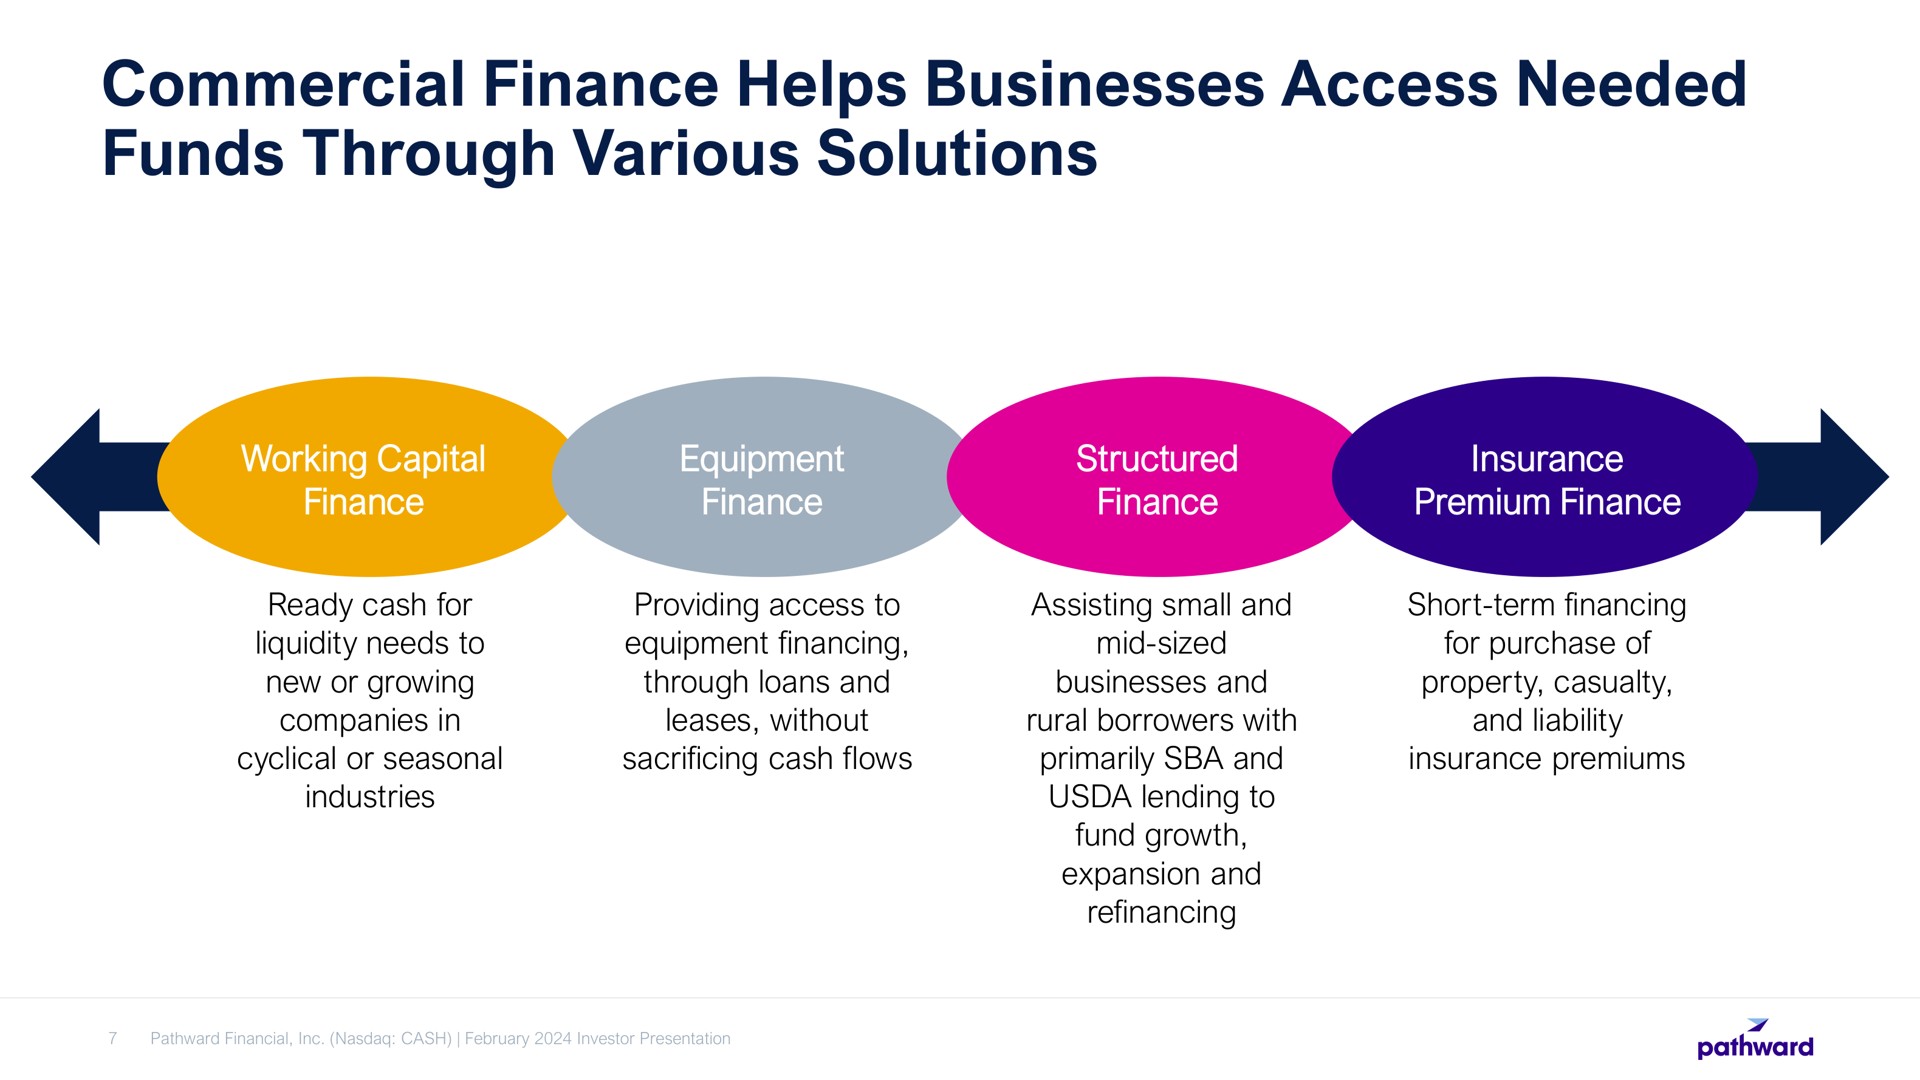 commercial finance helps businesses access needed funds through various solutions | Pathward Financial